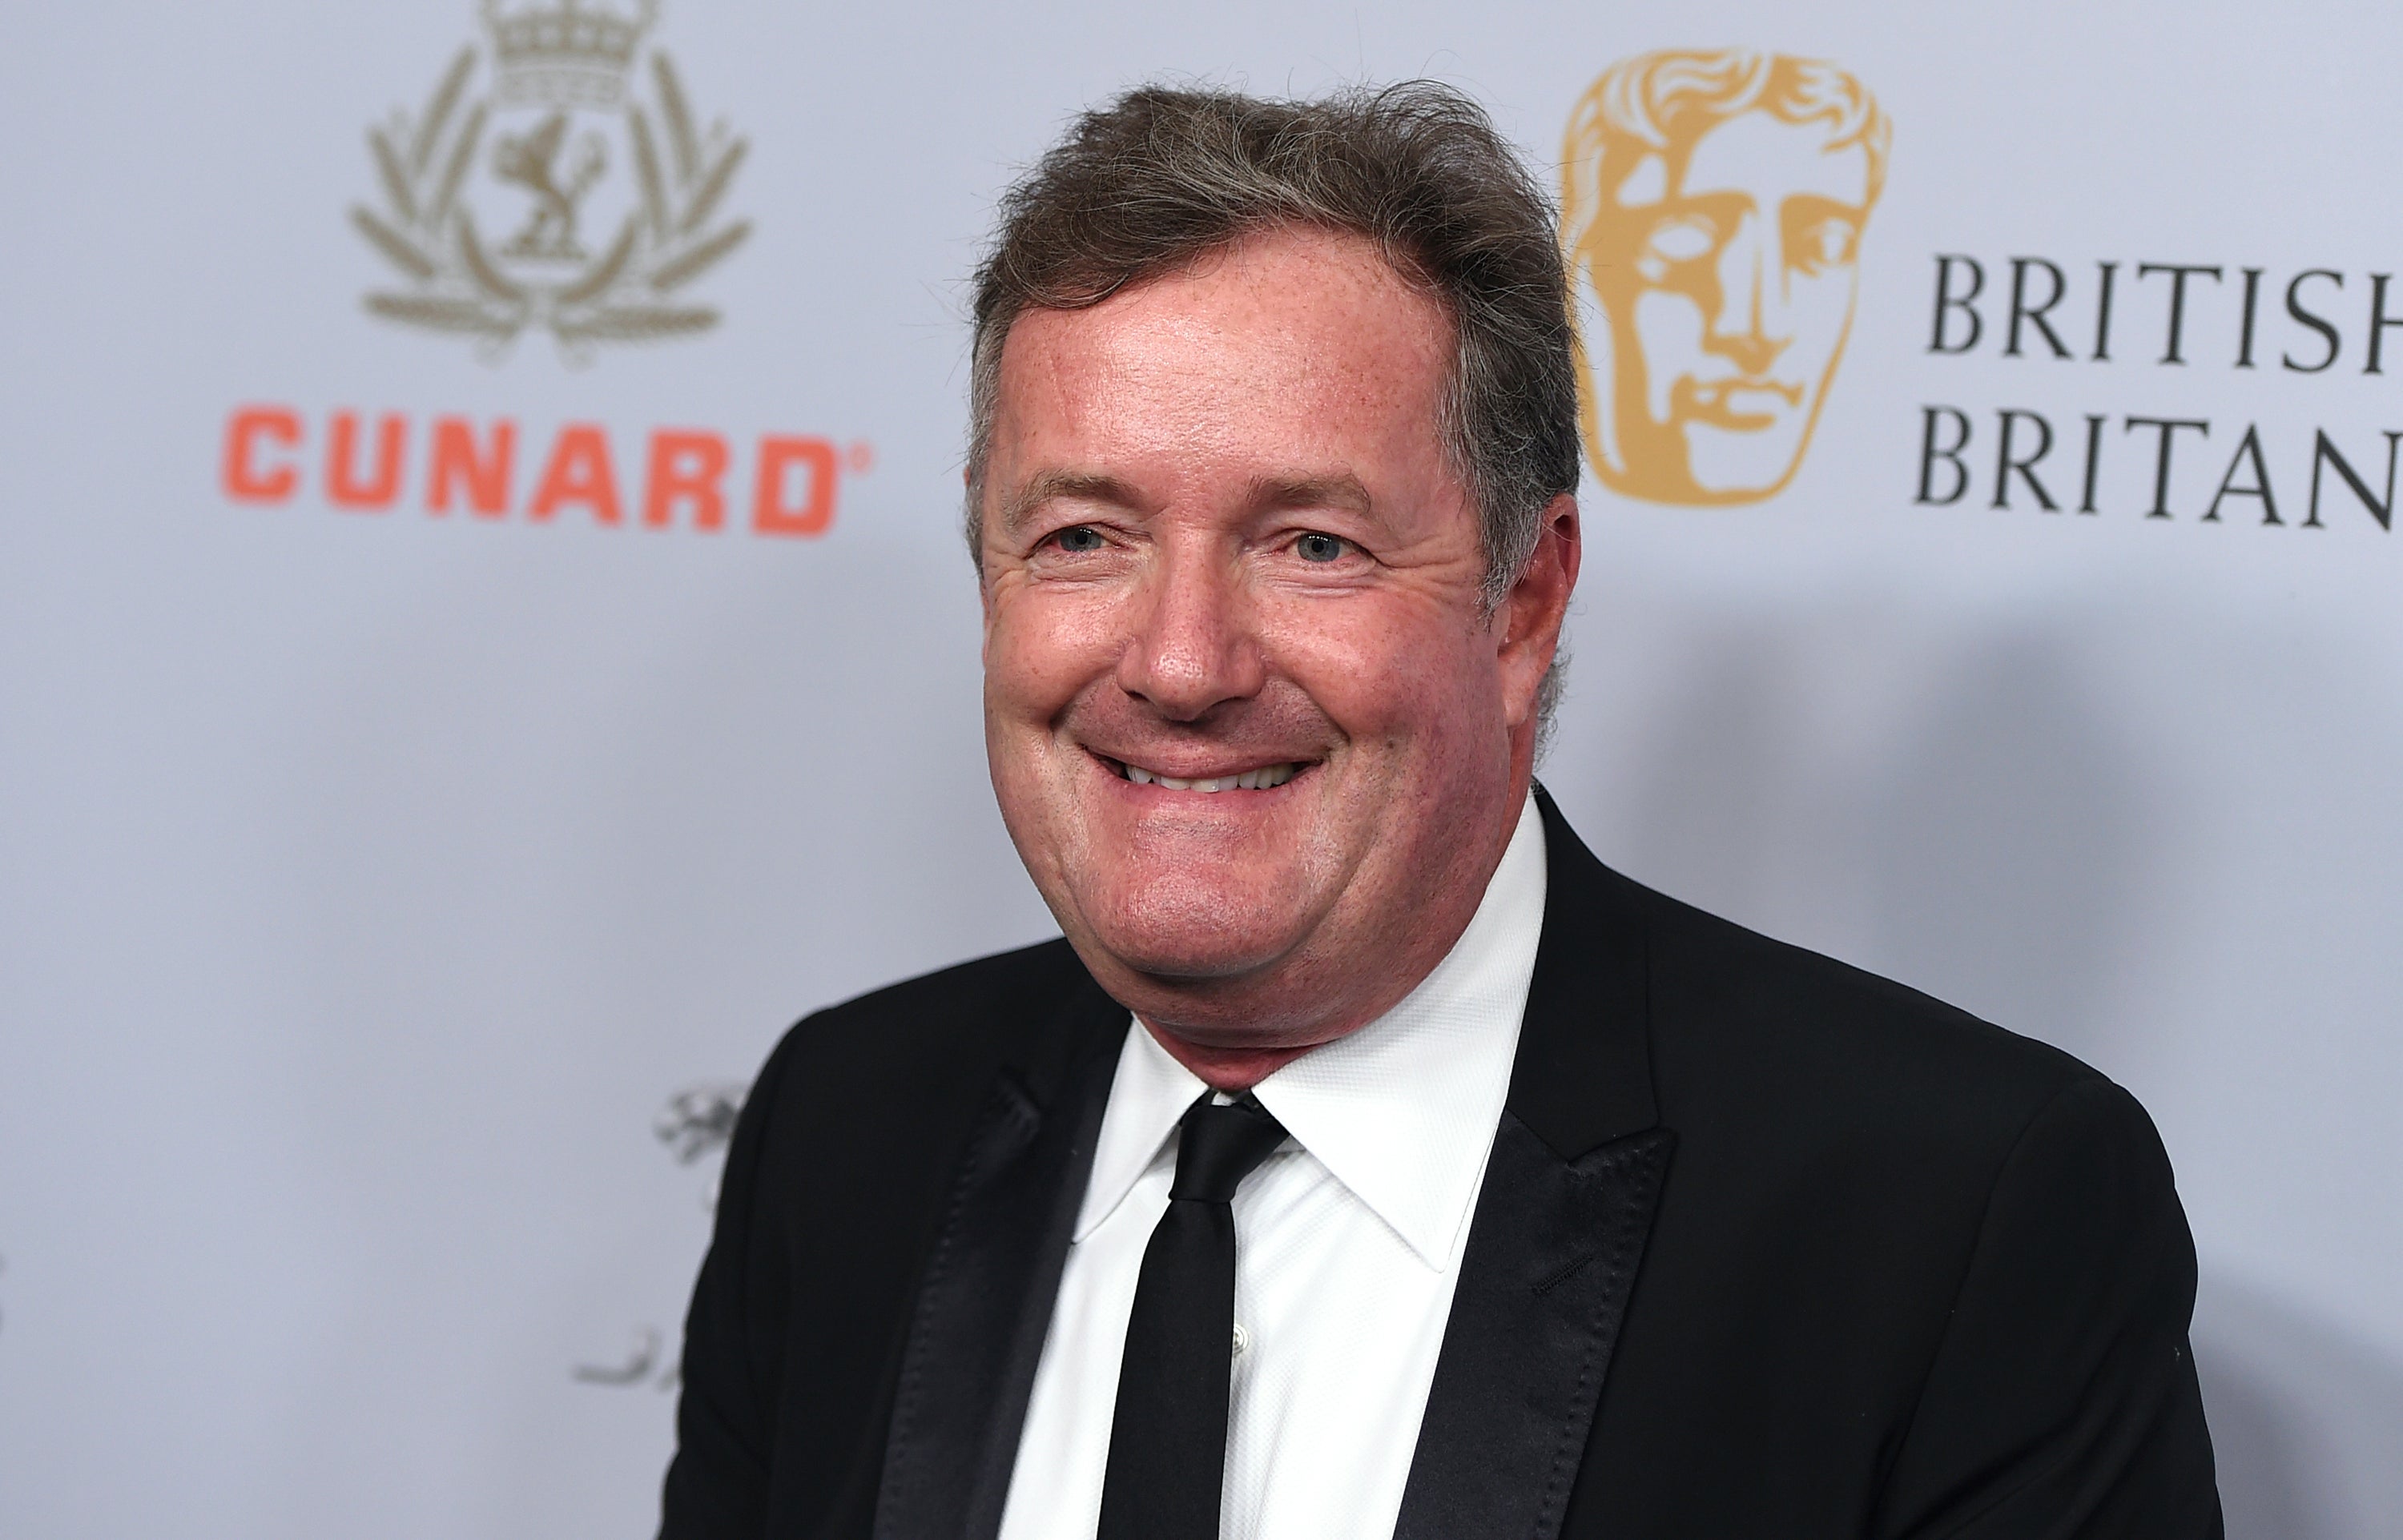 Piers Morgan is set to join News Corp and Fox News Media.